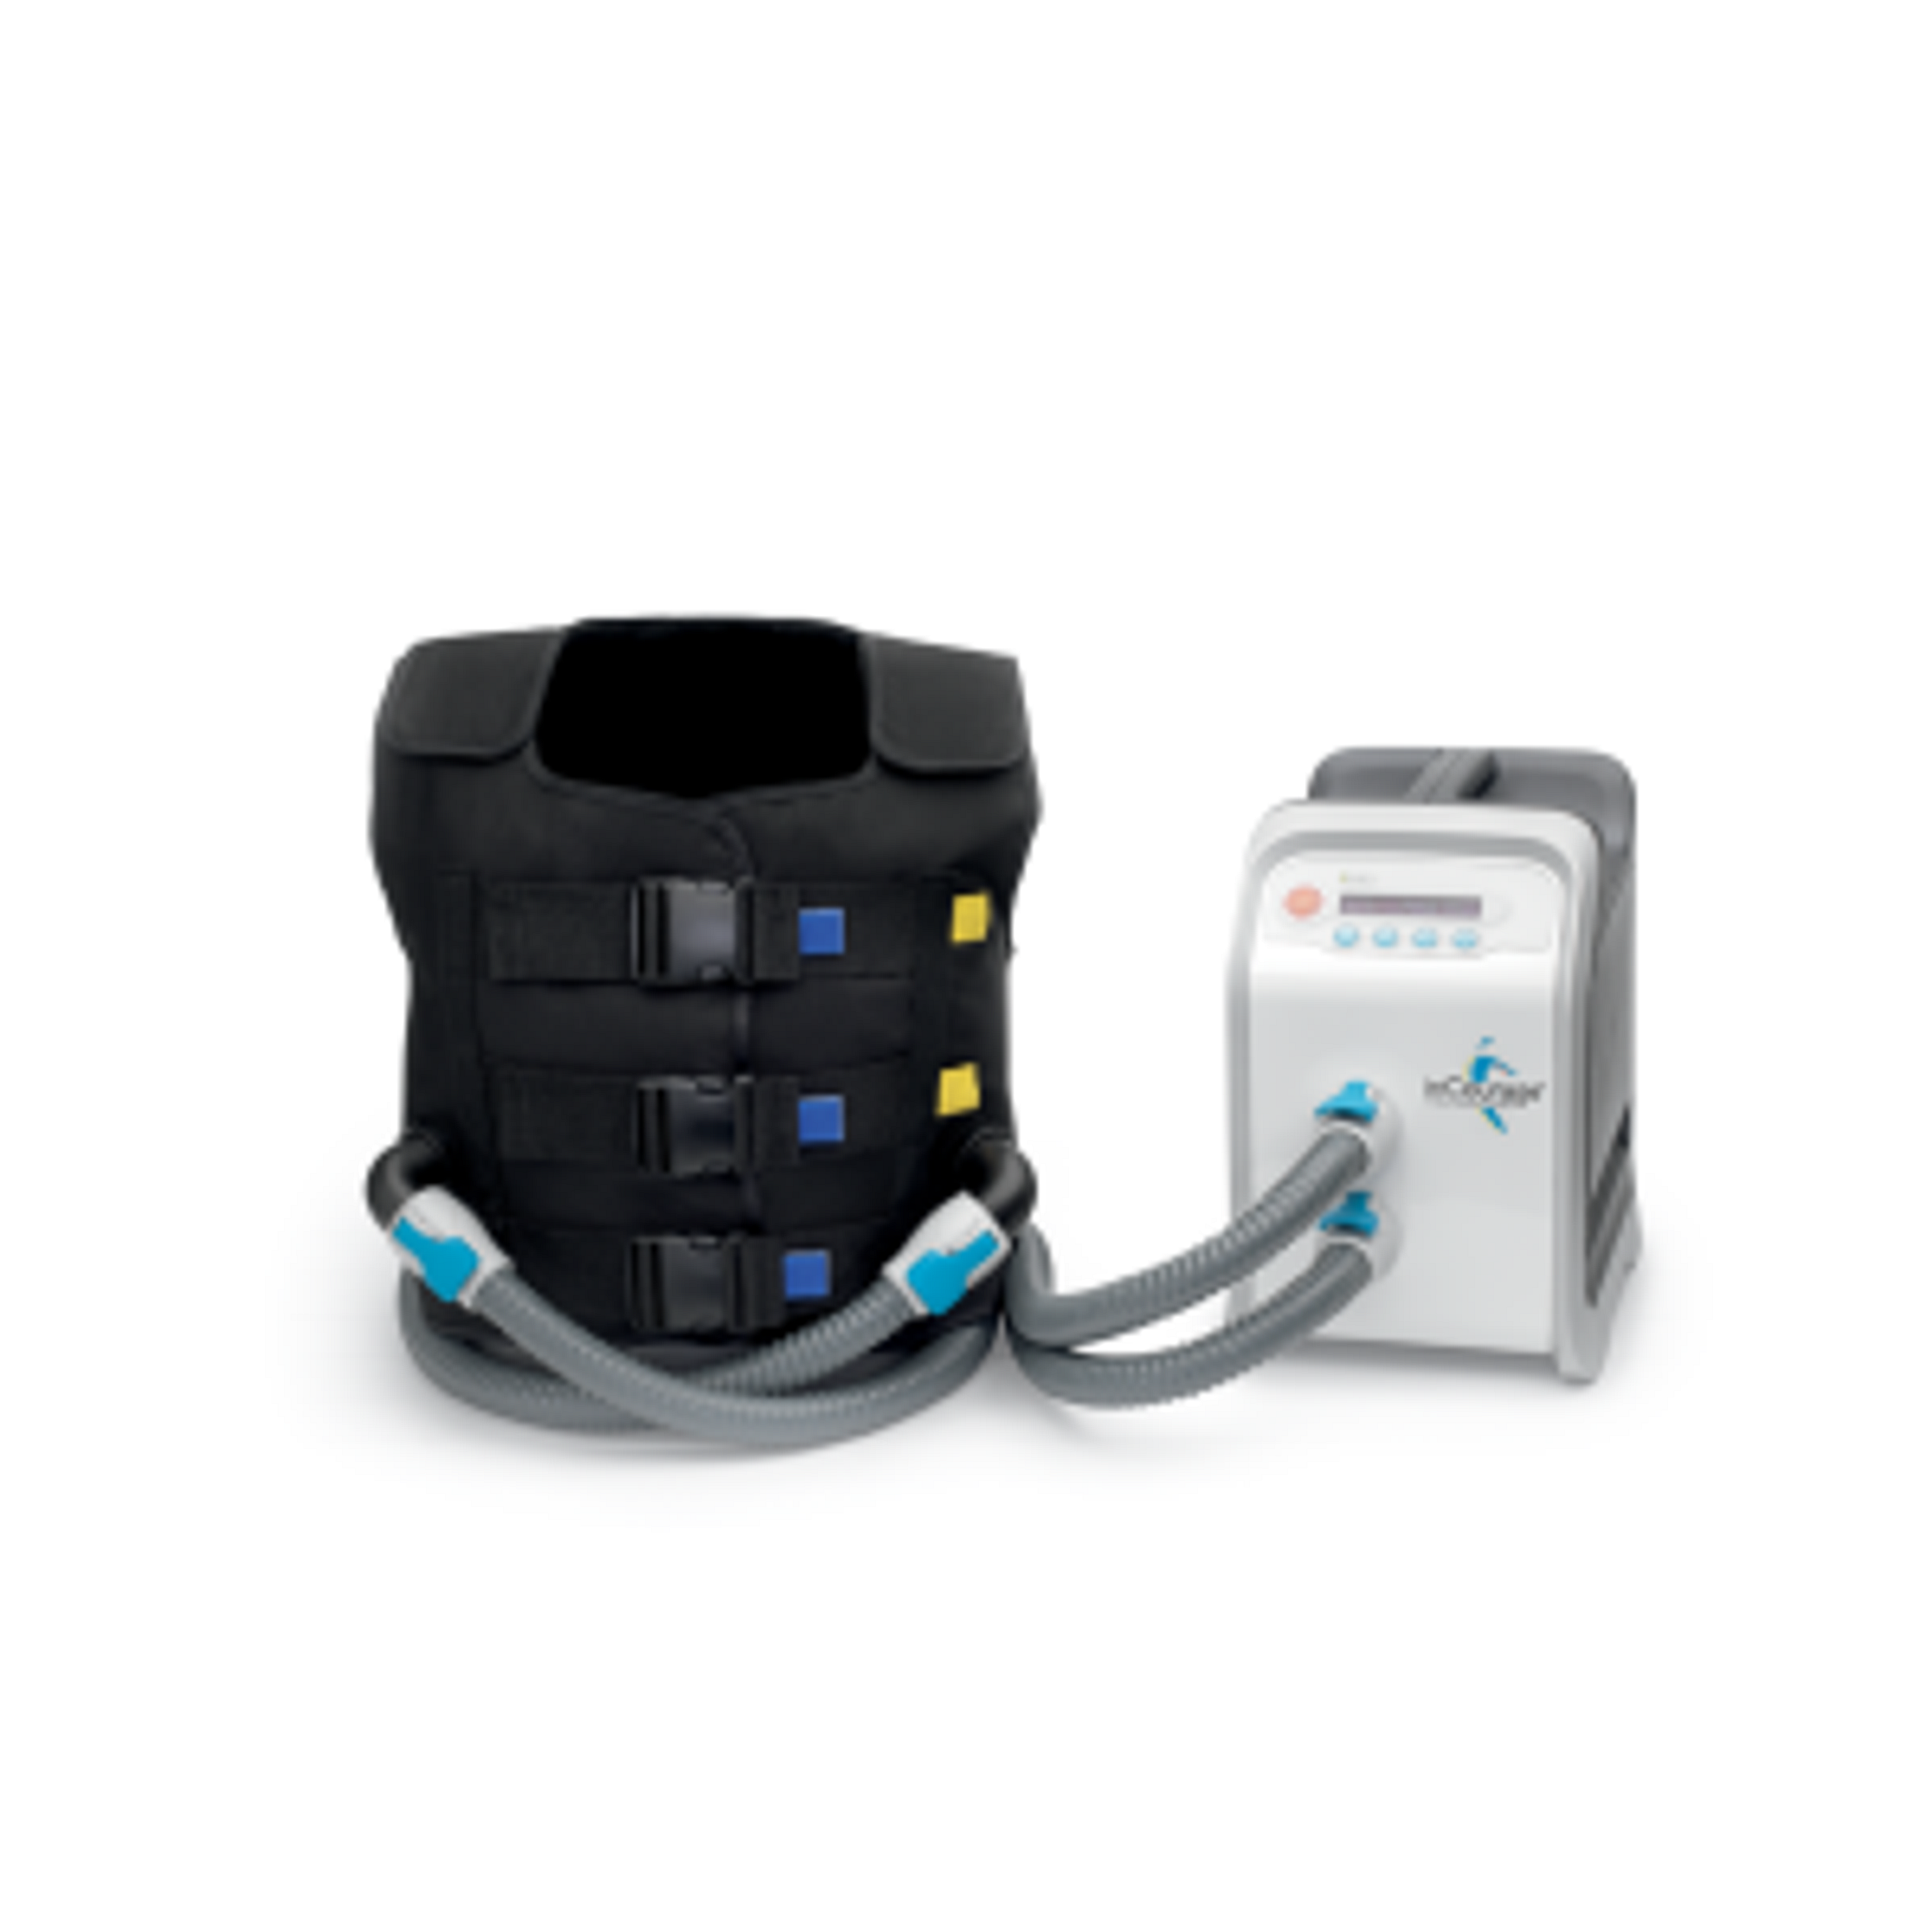 A product photo of the Philips InCourage System